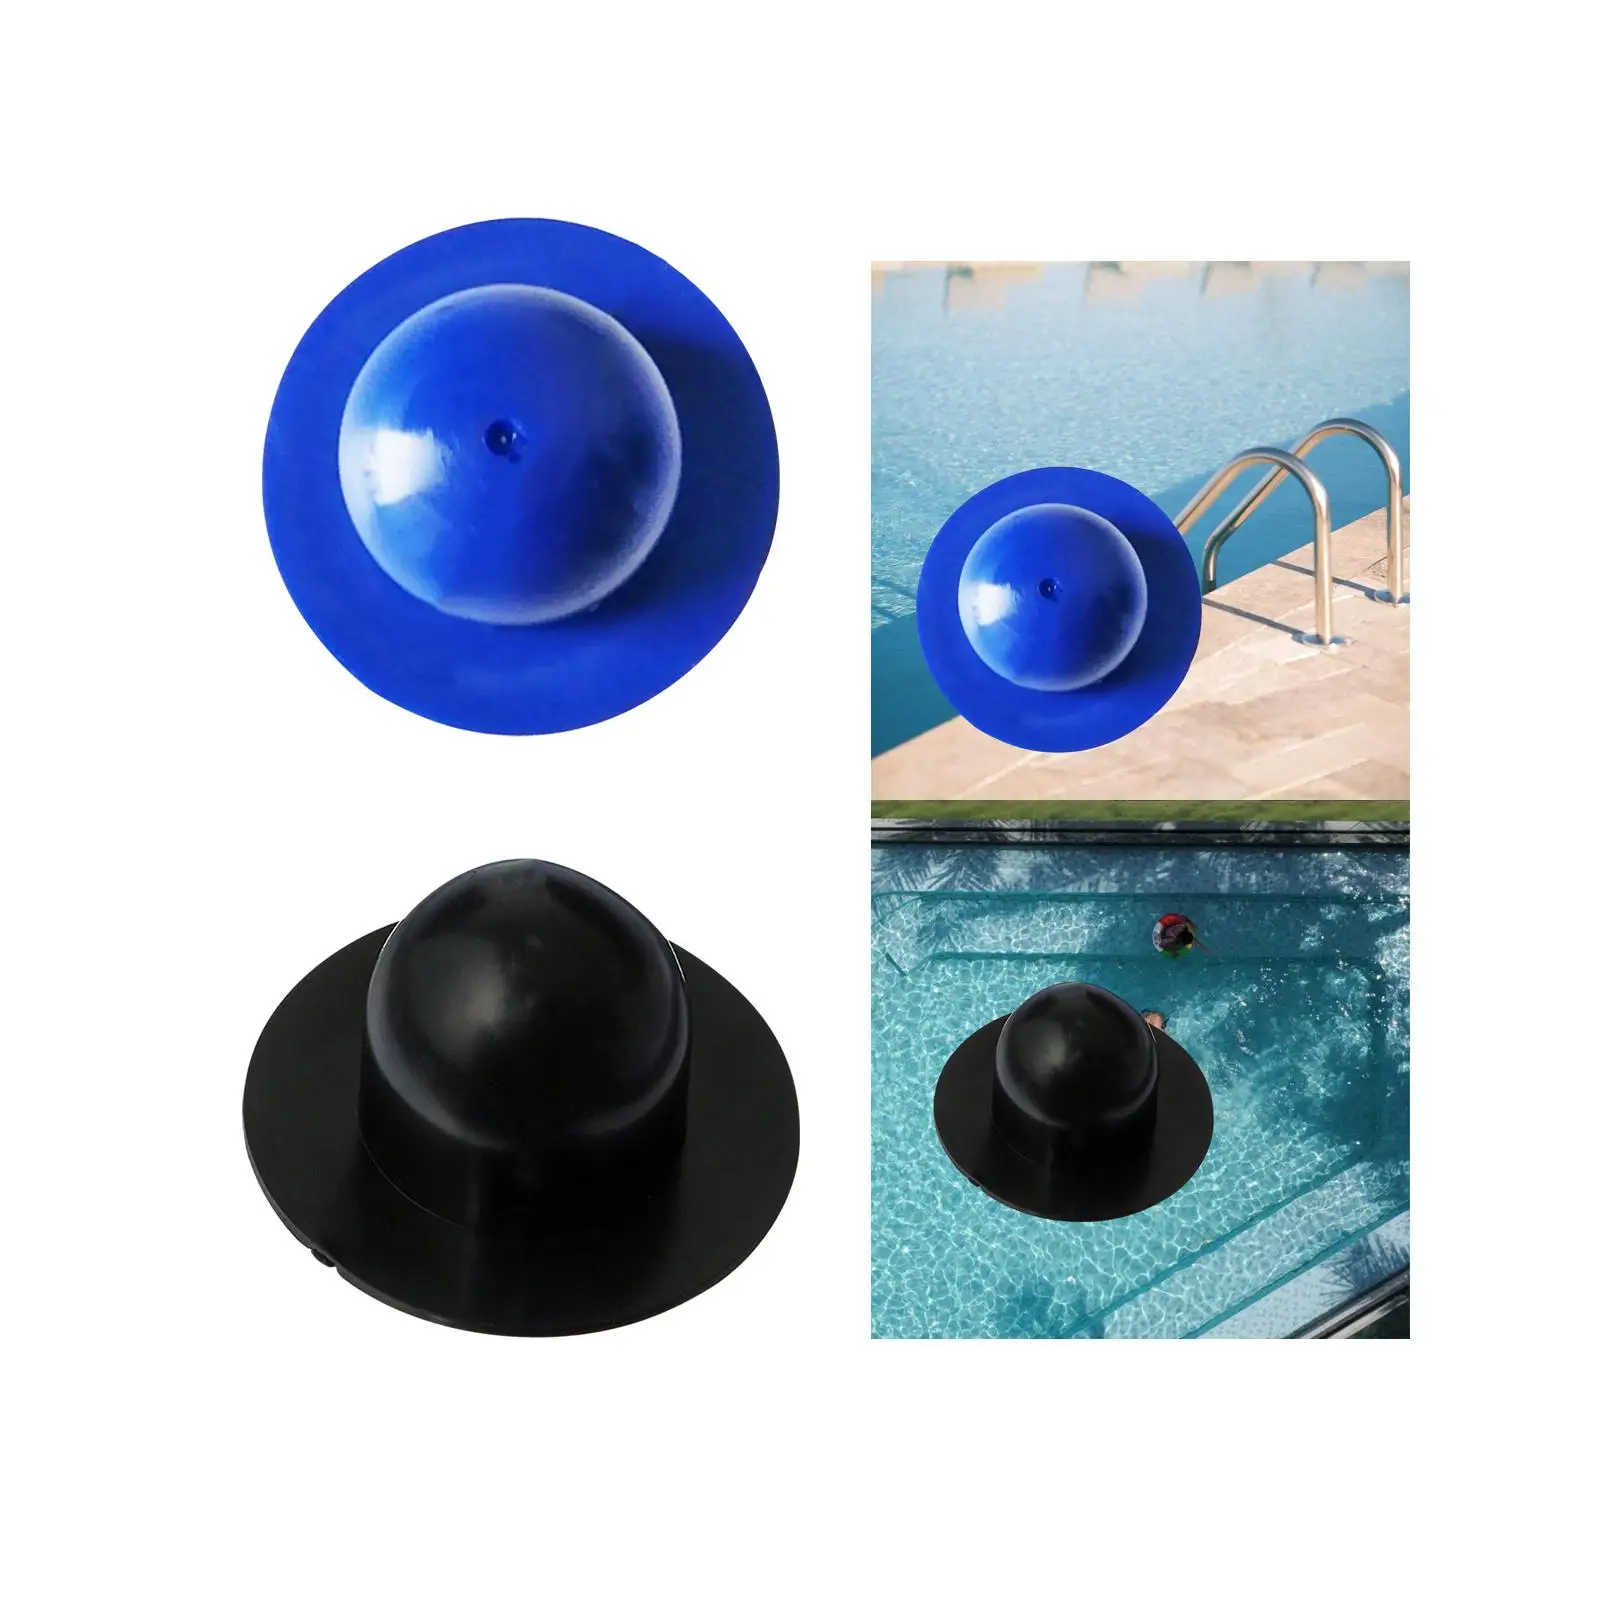 Pool Pump Strainer Wall Plugs Pool Pump Plug Filter Pump Stopper Replacement Parts for Most above Ground Pools Accessories